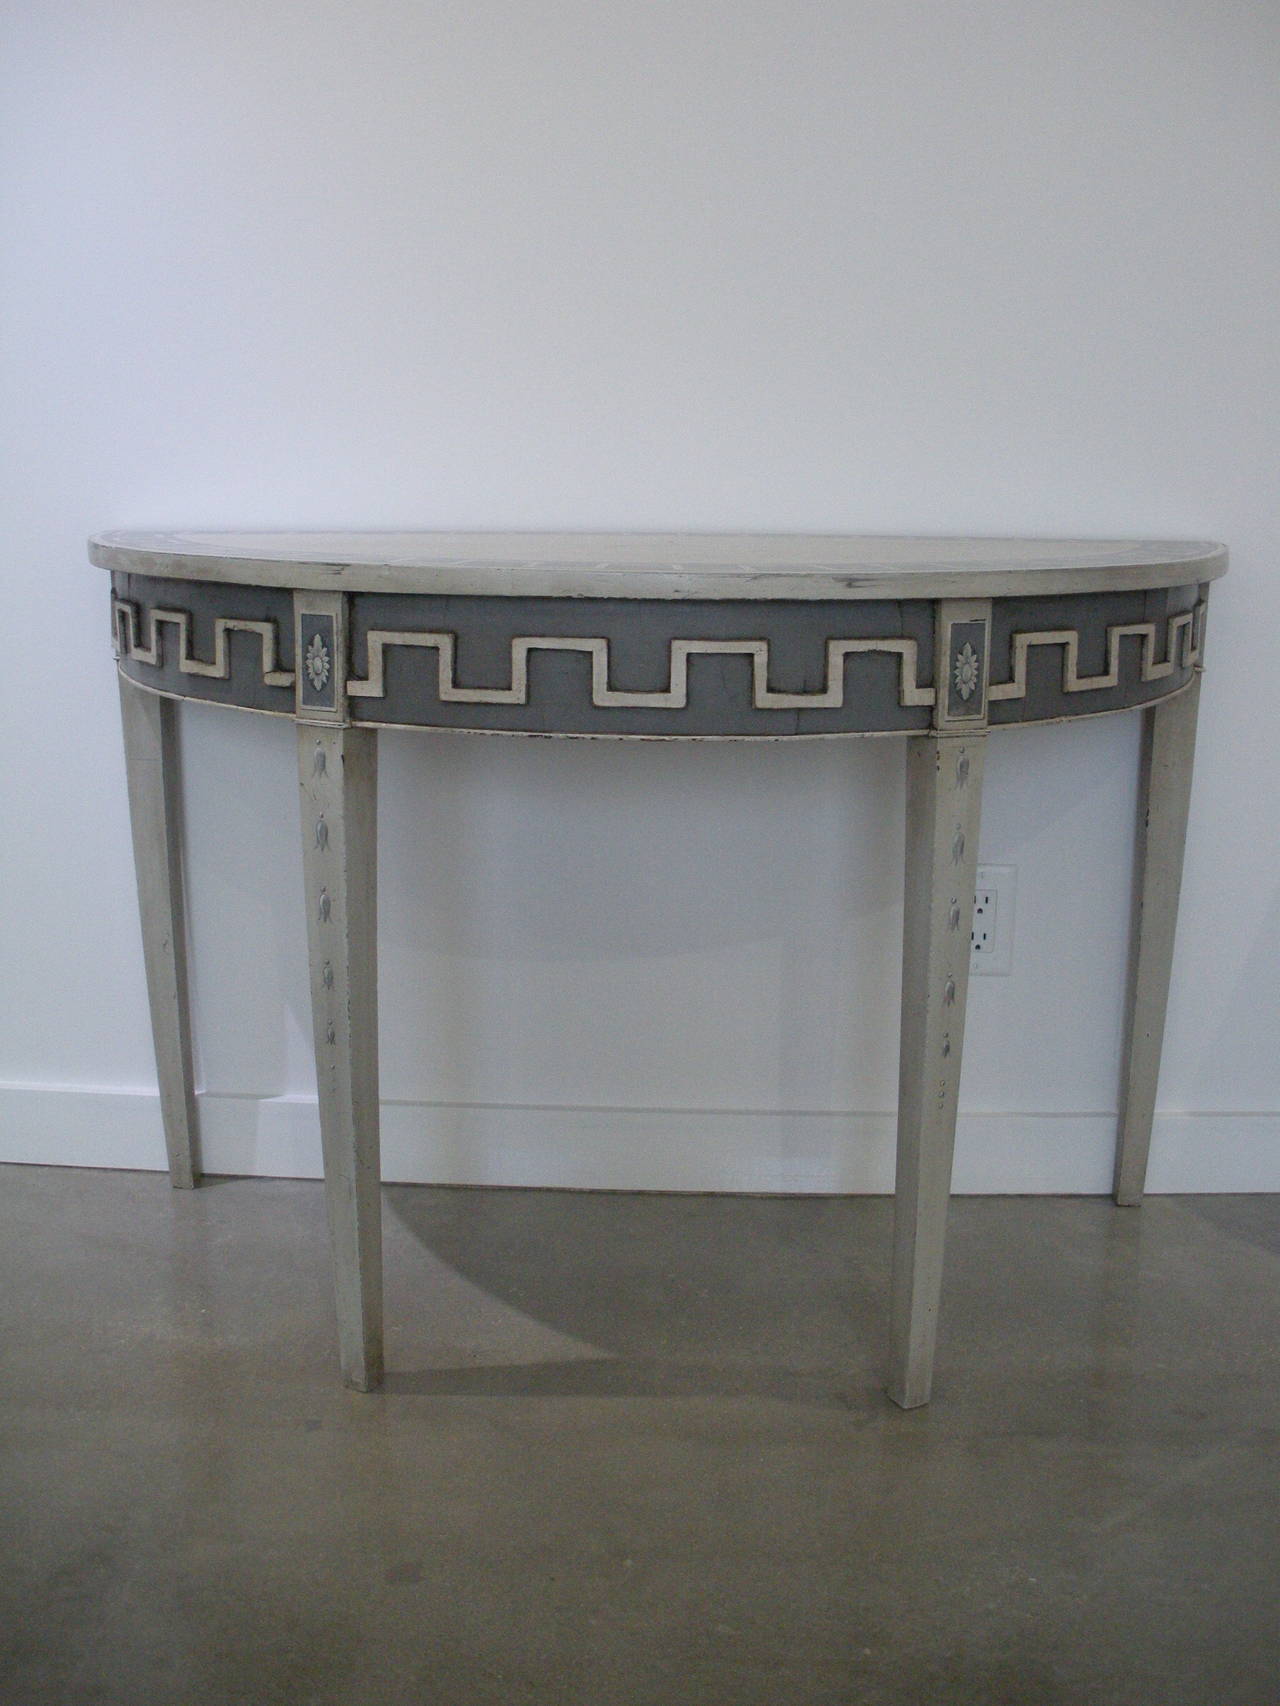 Pair of unusual classical French console hand-painted with a modified Greek key designs.

Please feel free to contact us directly for a shipping quote, or other questions and information including making an offer by clicking 